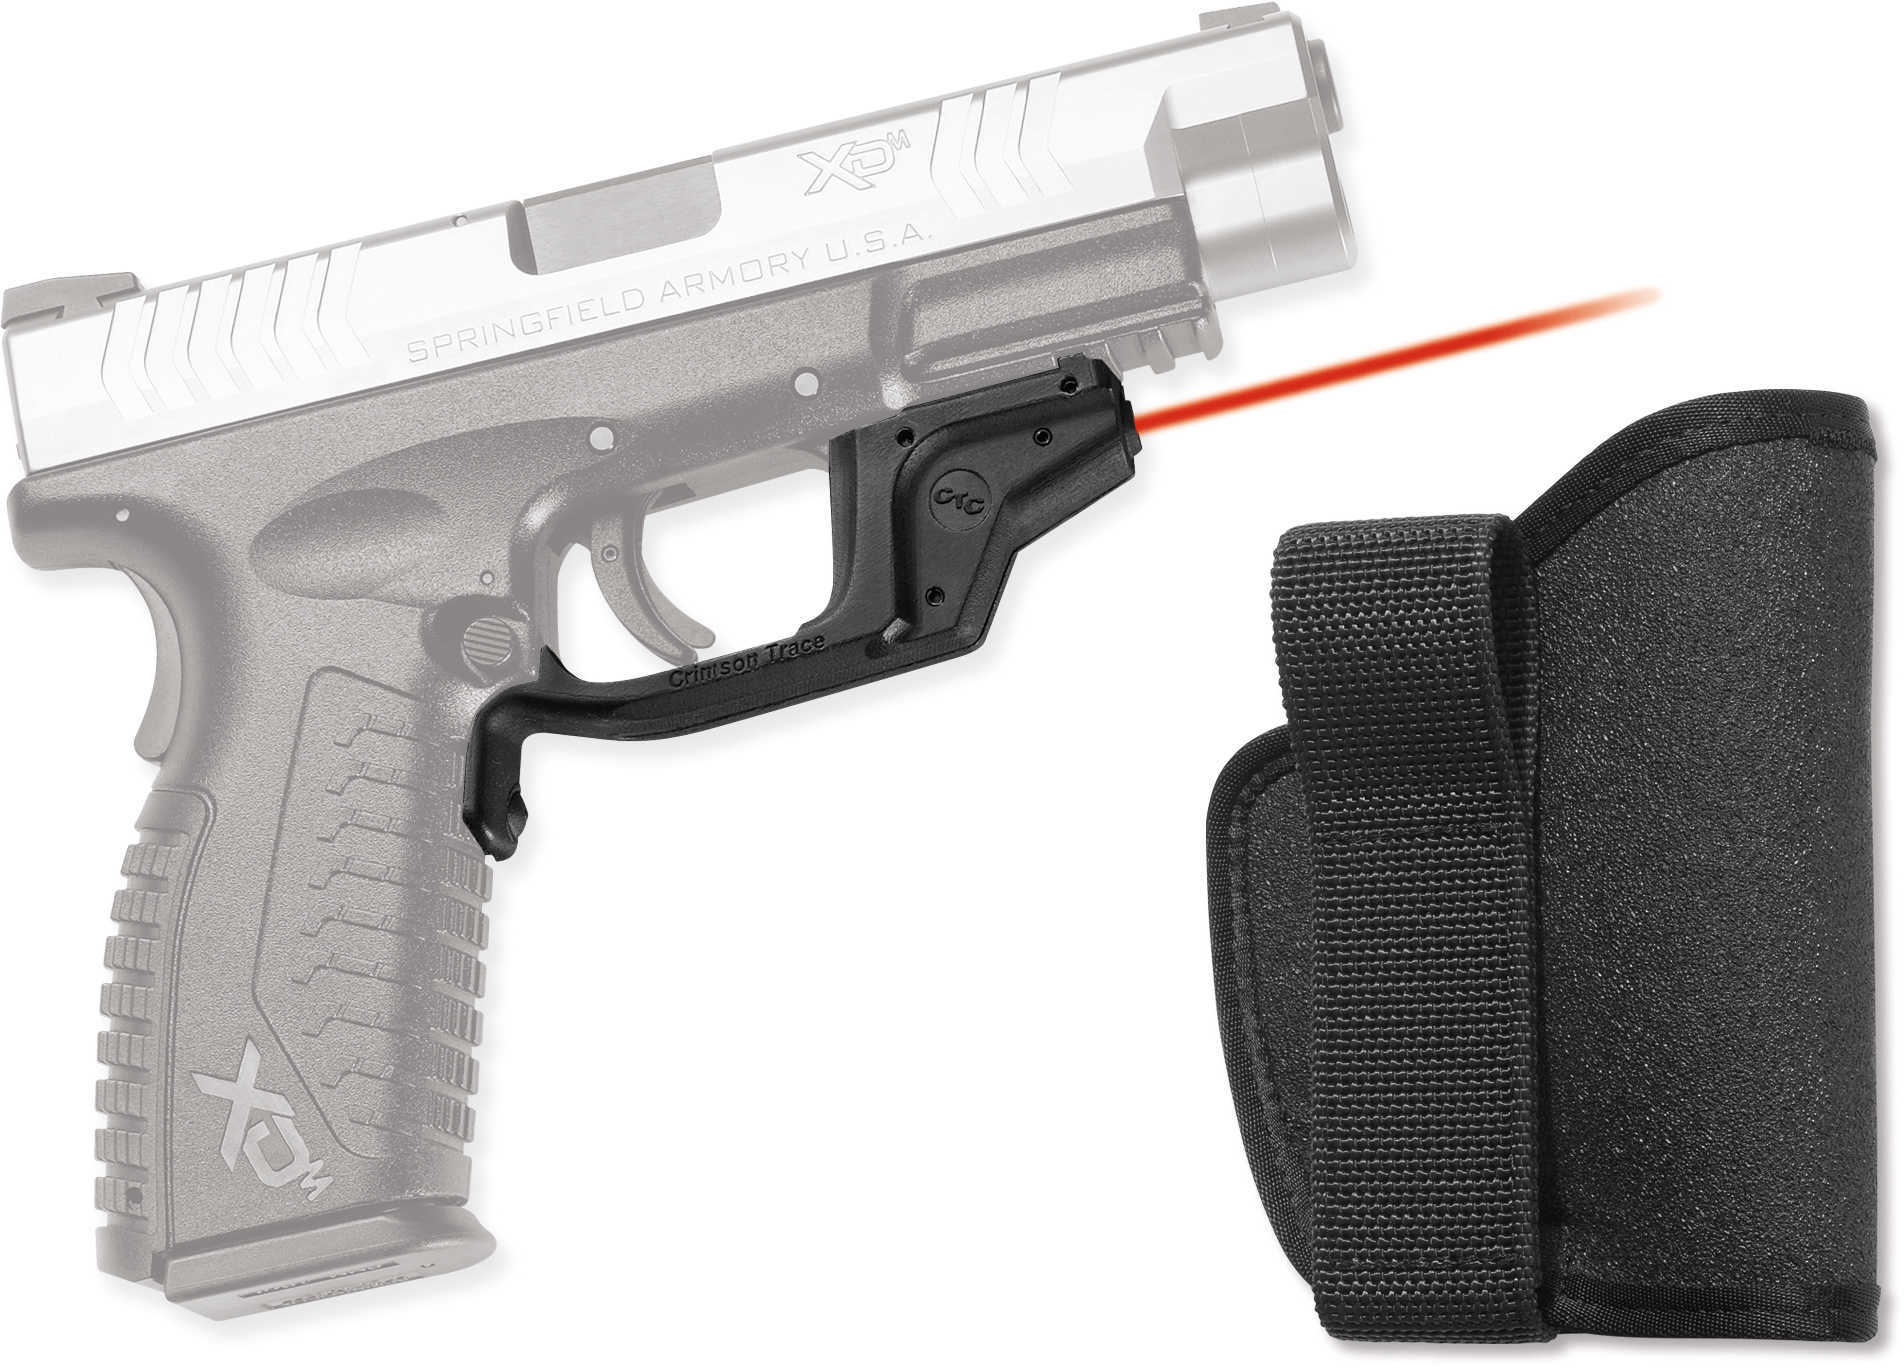 Crimson Trace Springfield Armory XD,XDM, Overmold, Front Activation LG-448H